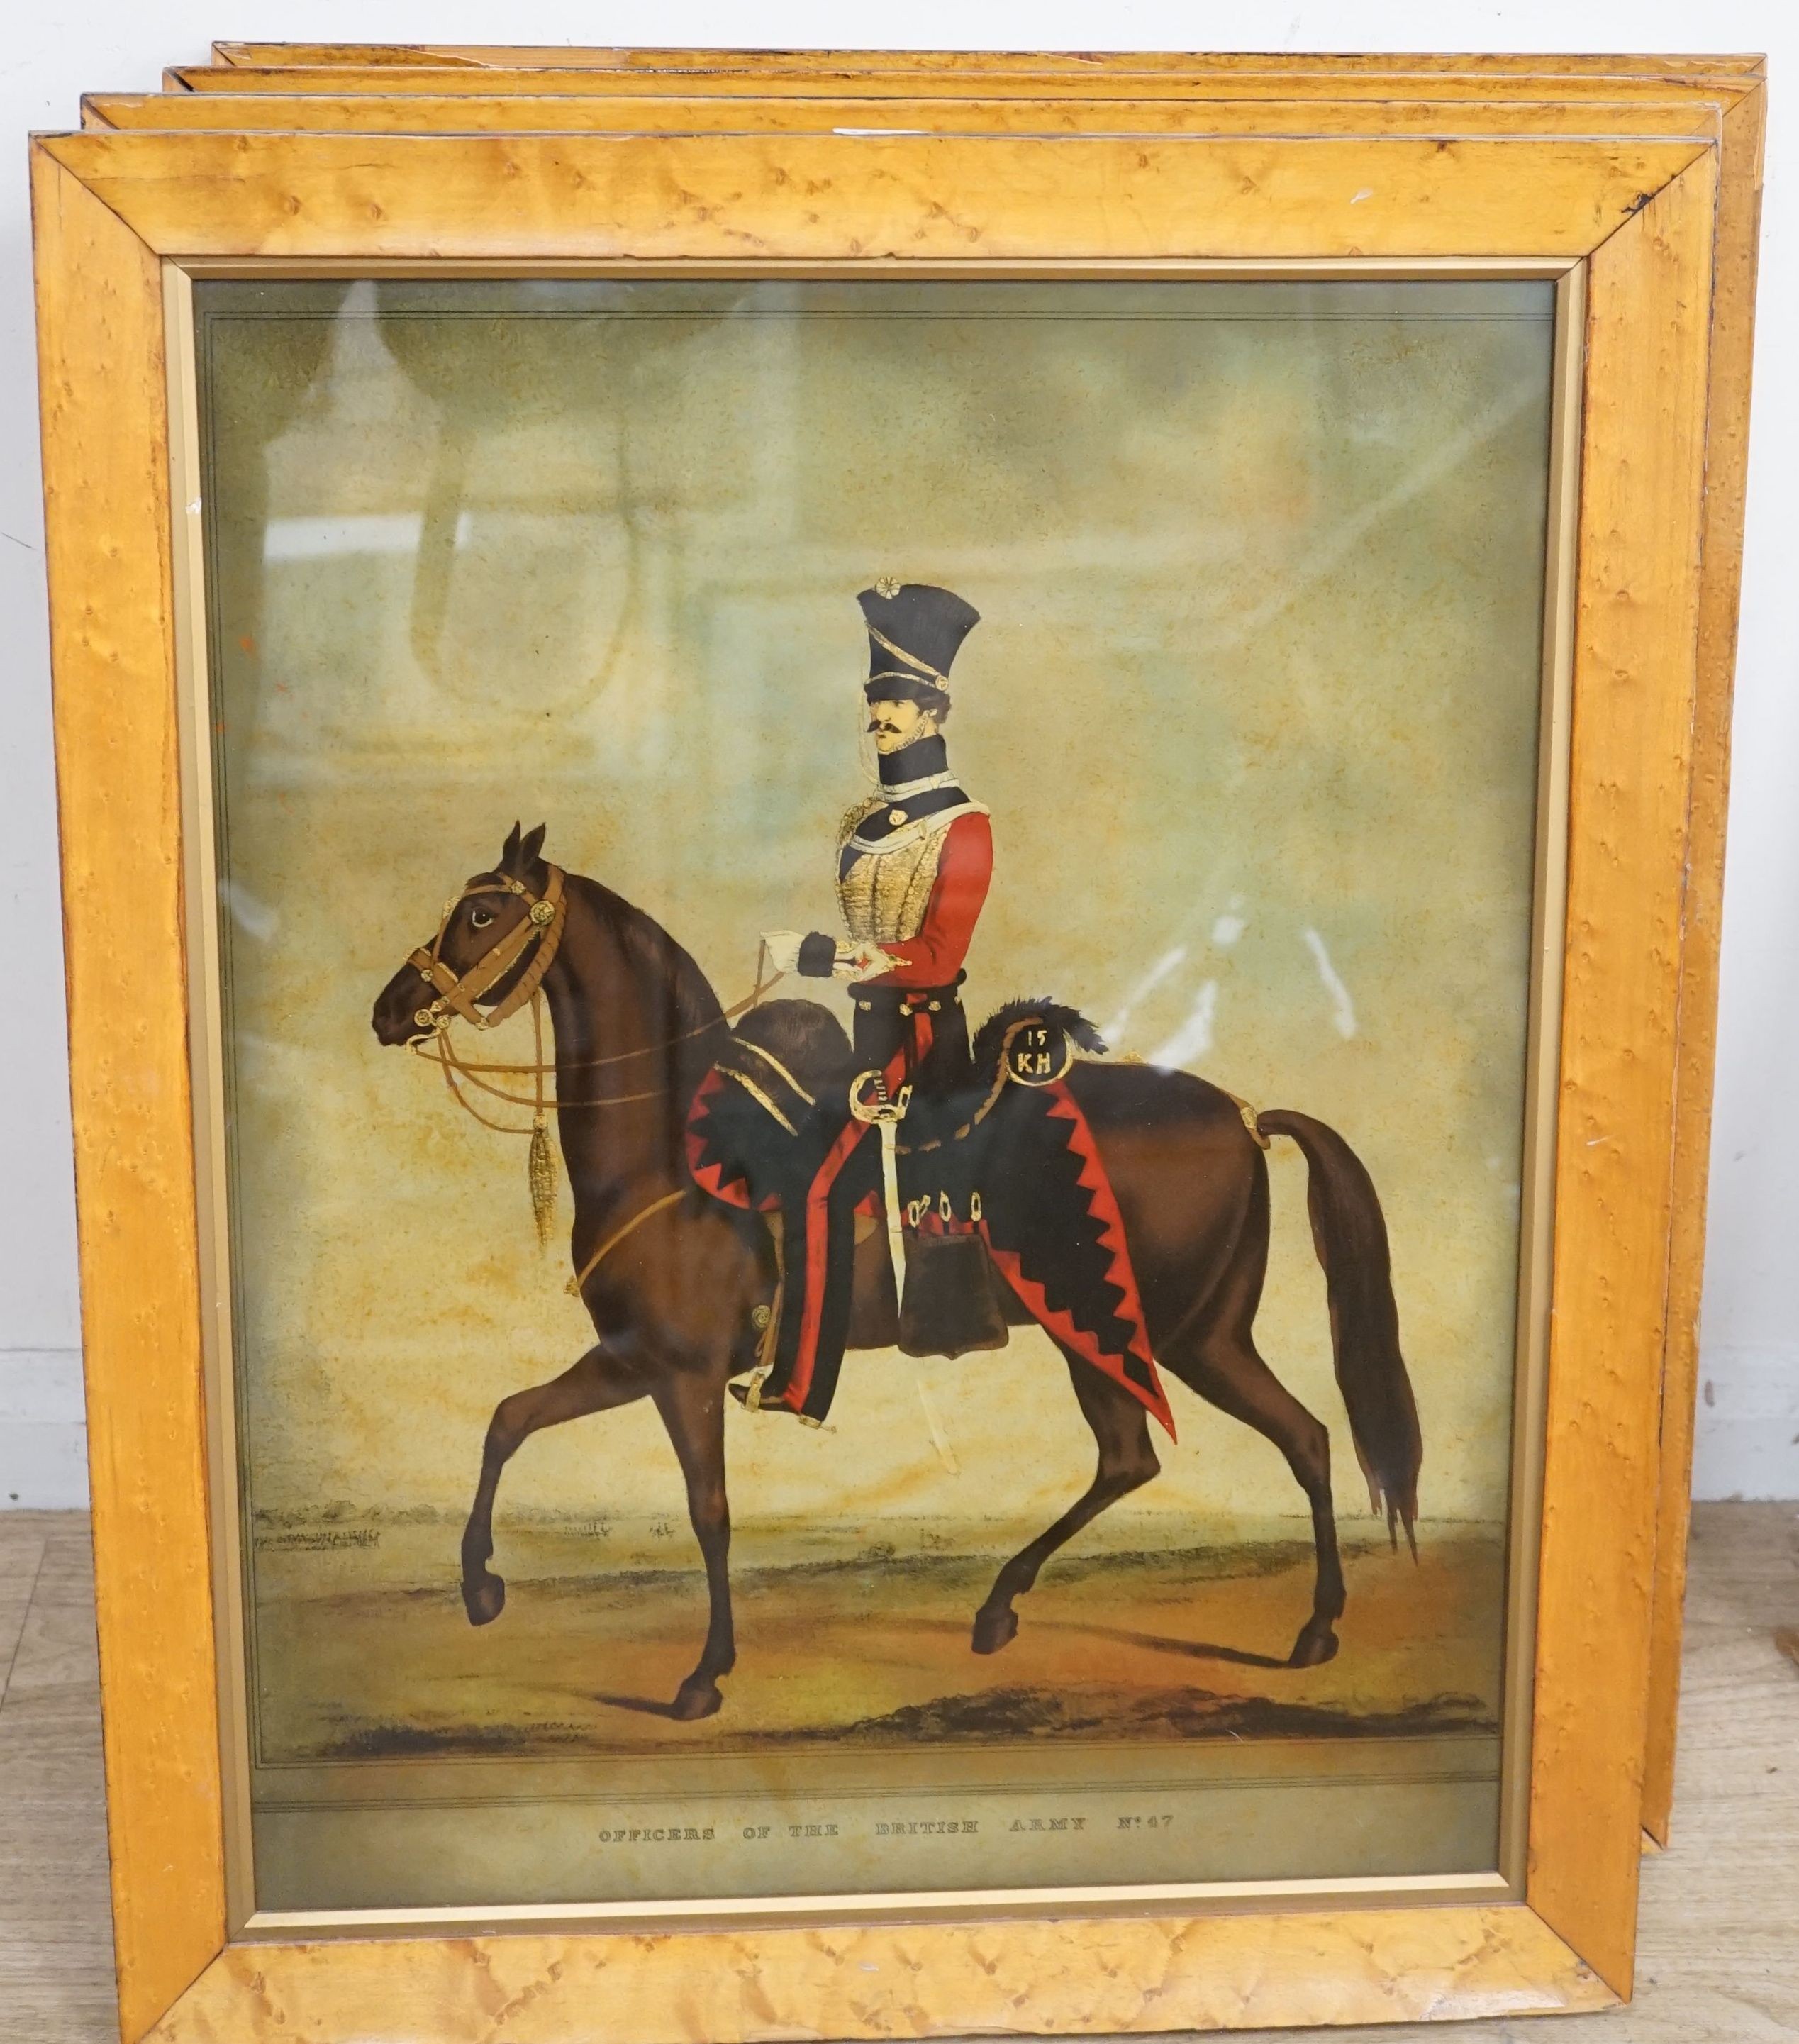 A set of four reverse prints on glass, 'Officers of the British Army', 60 x 46cm